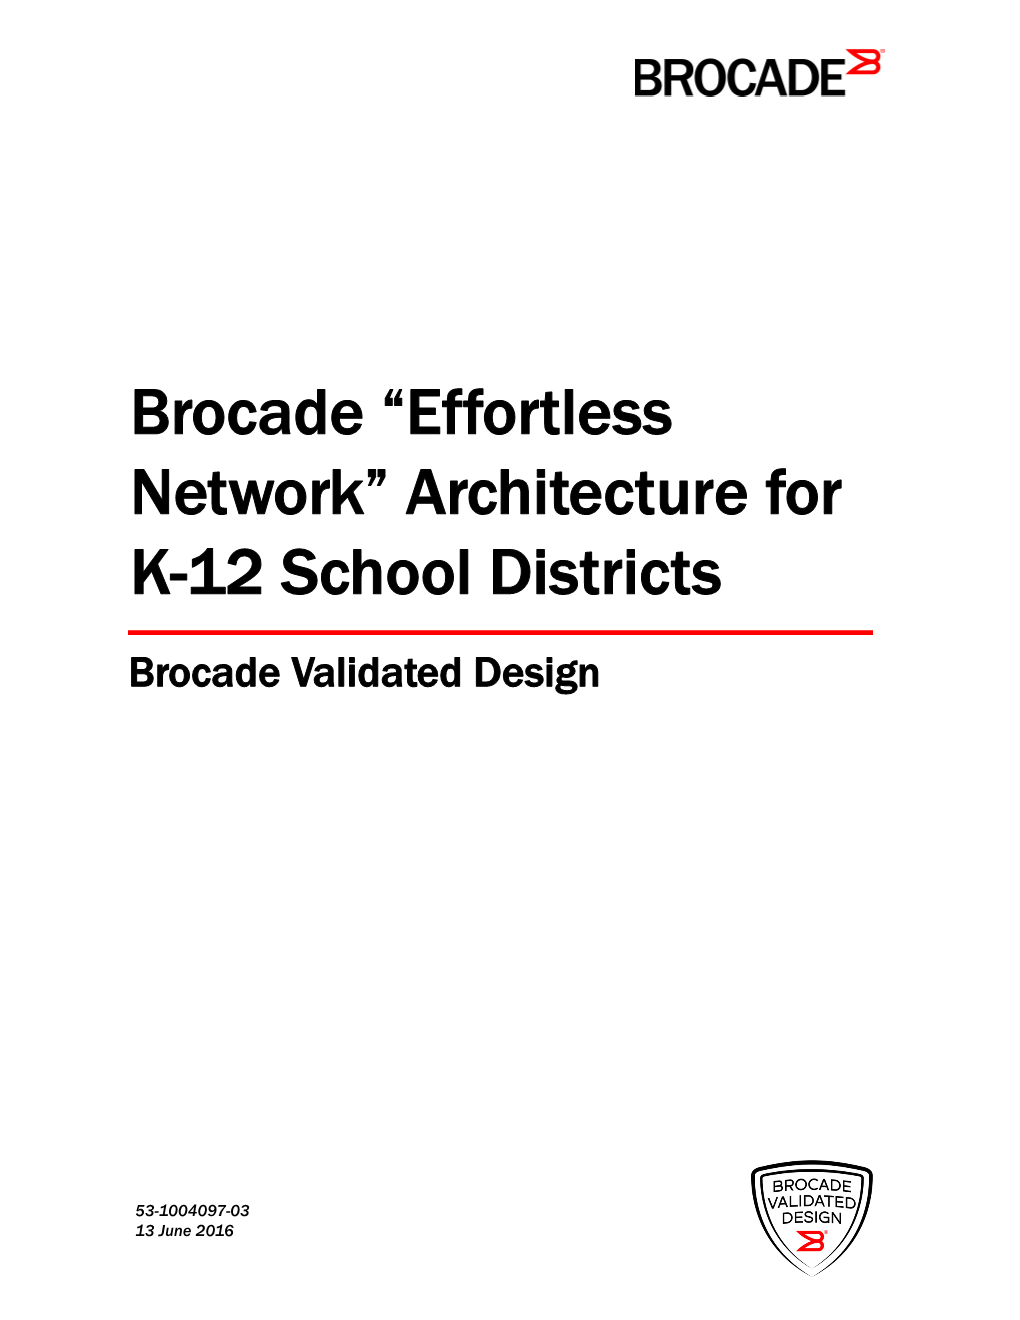 Brocade “Effortless Network” Architecture for K-12 School Districts